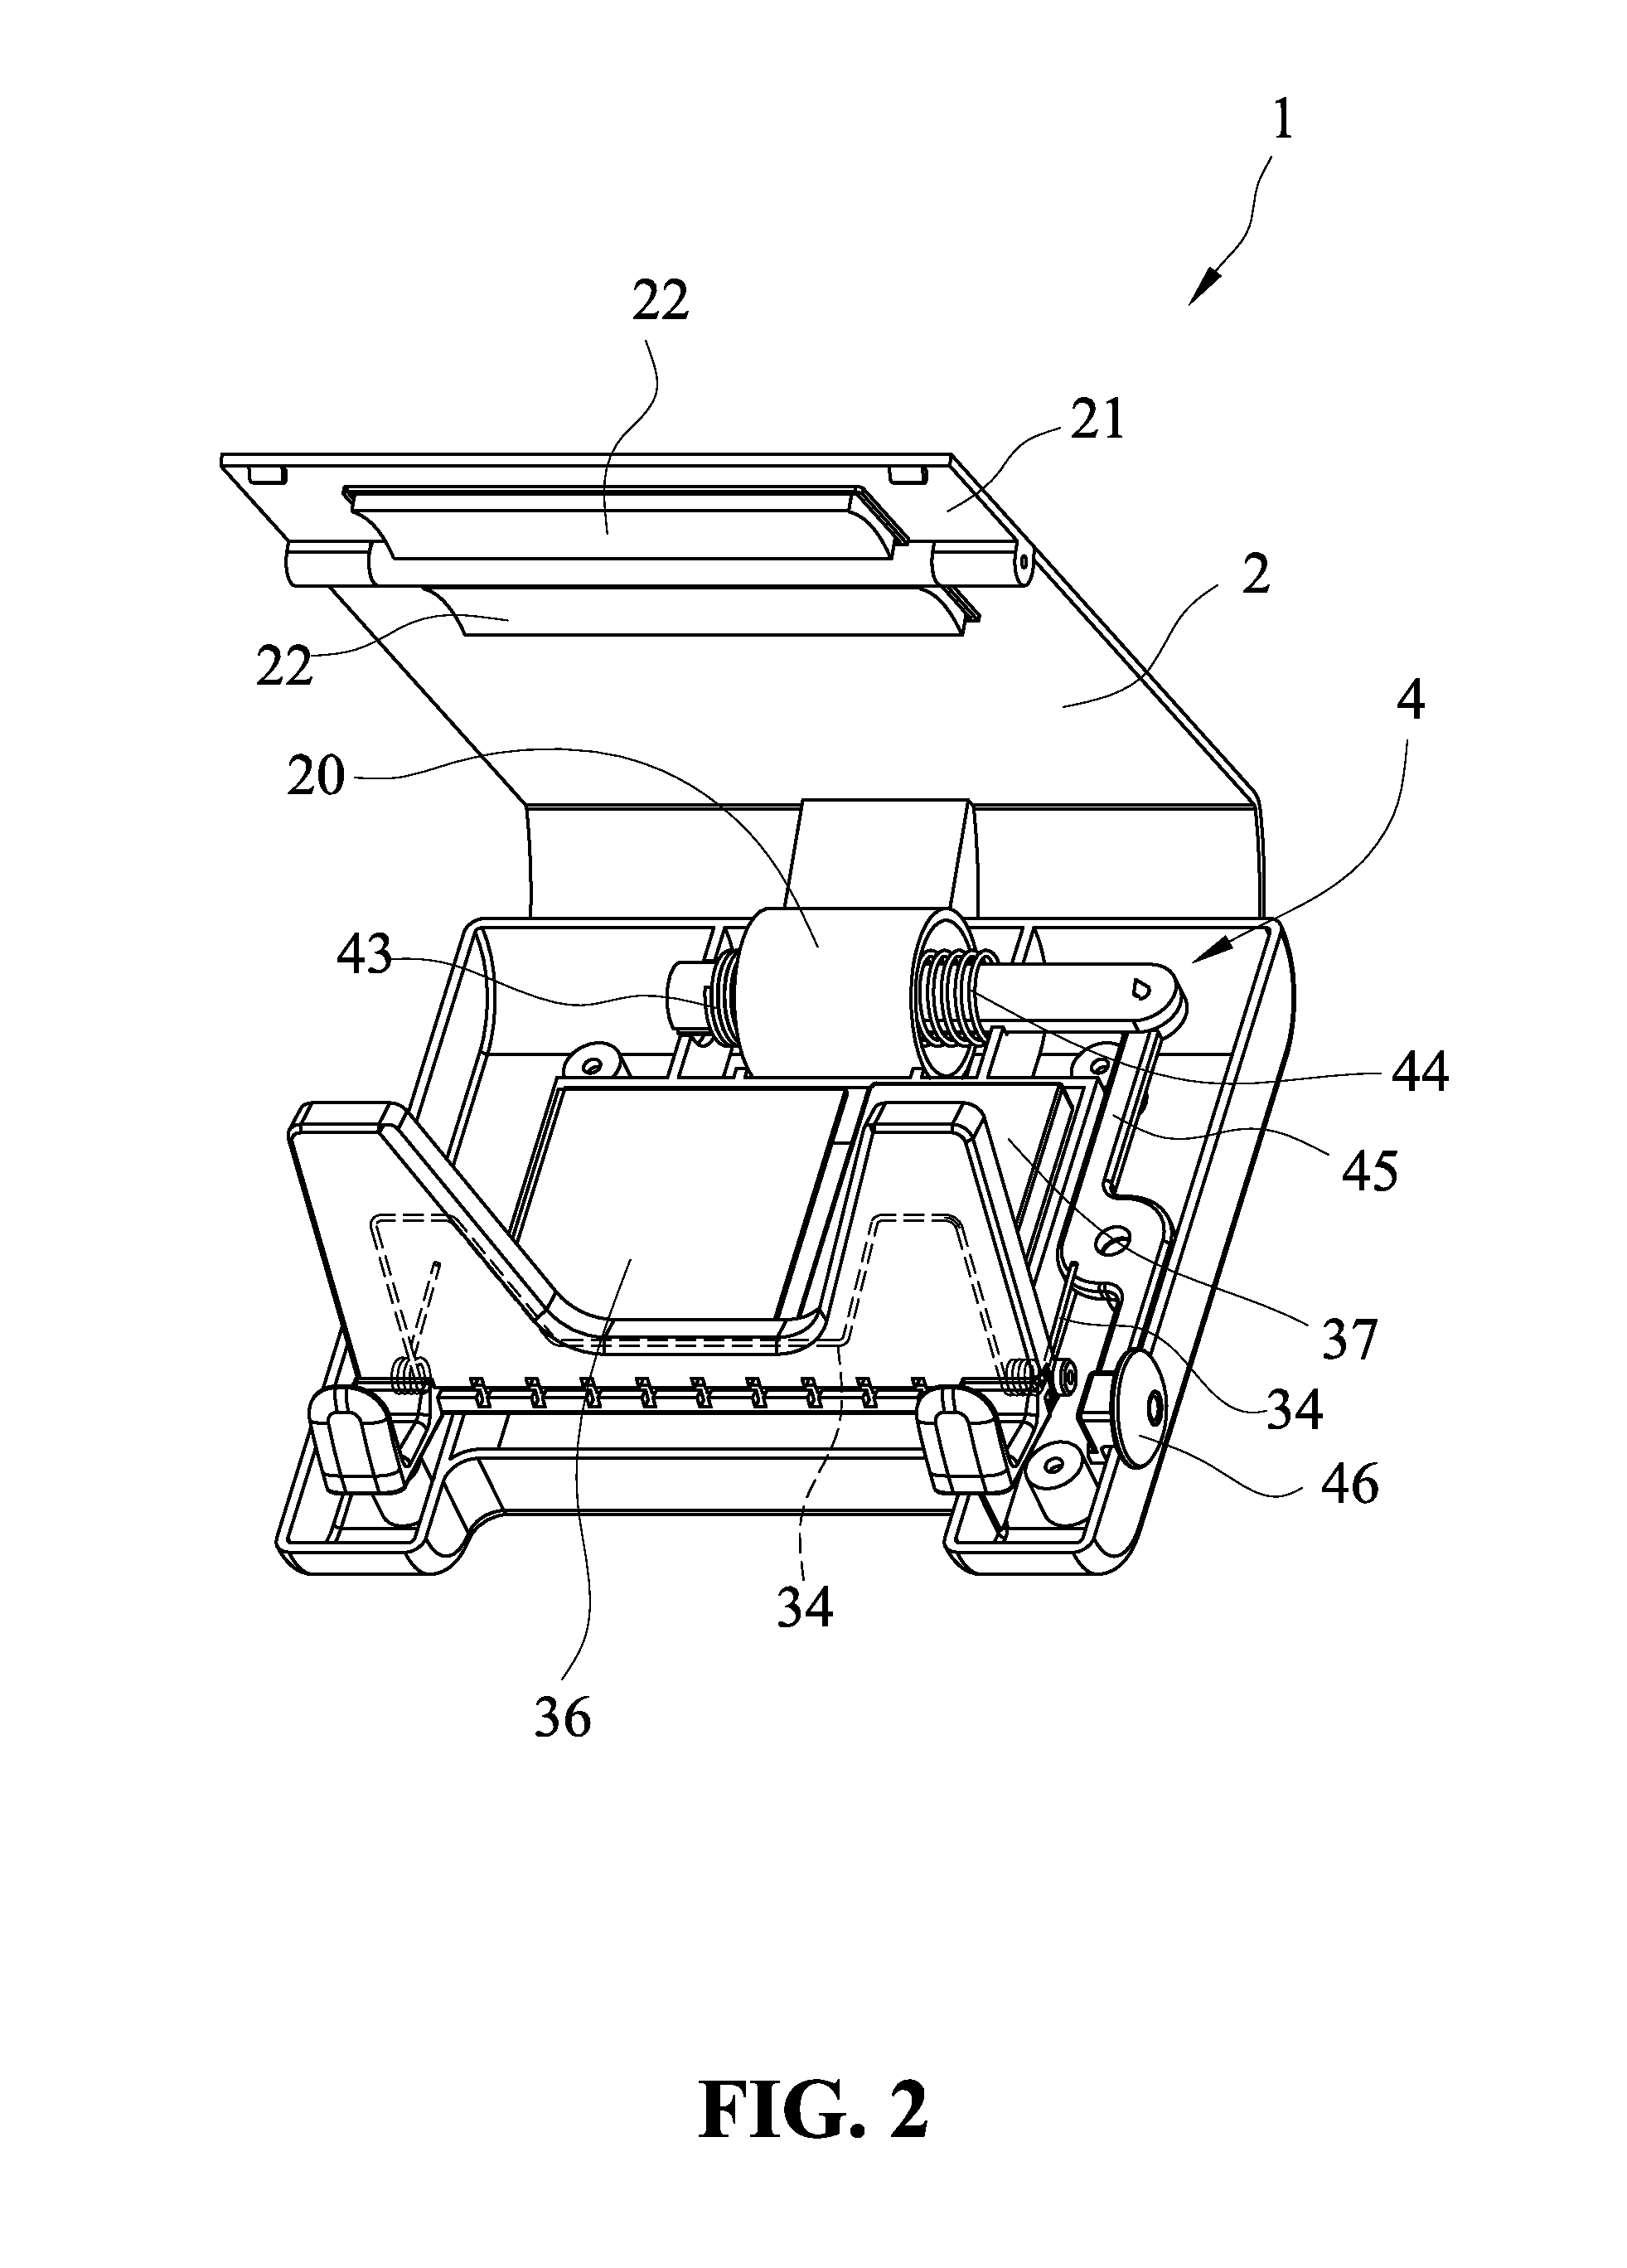 Apparatus for holding portable electronic device